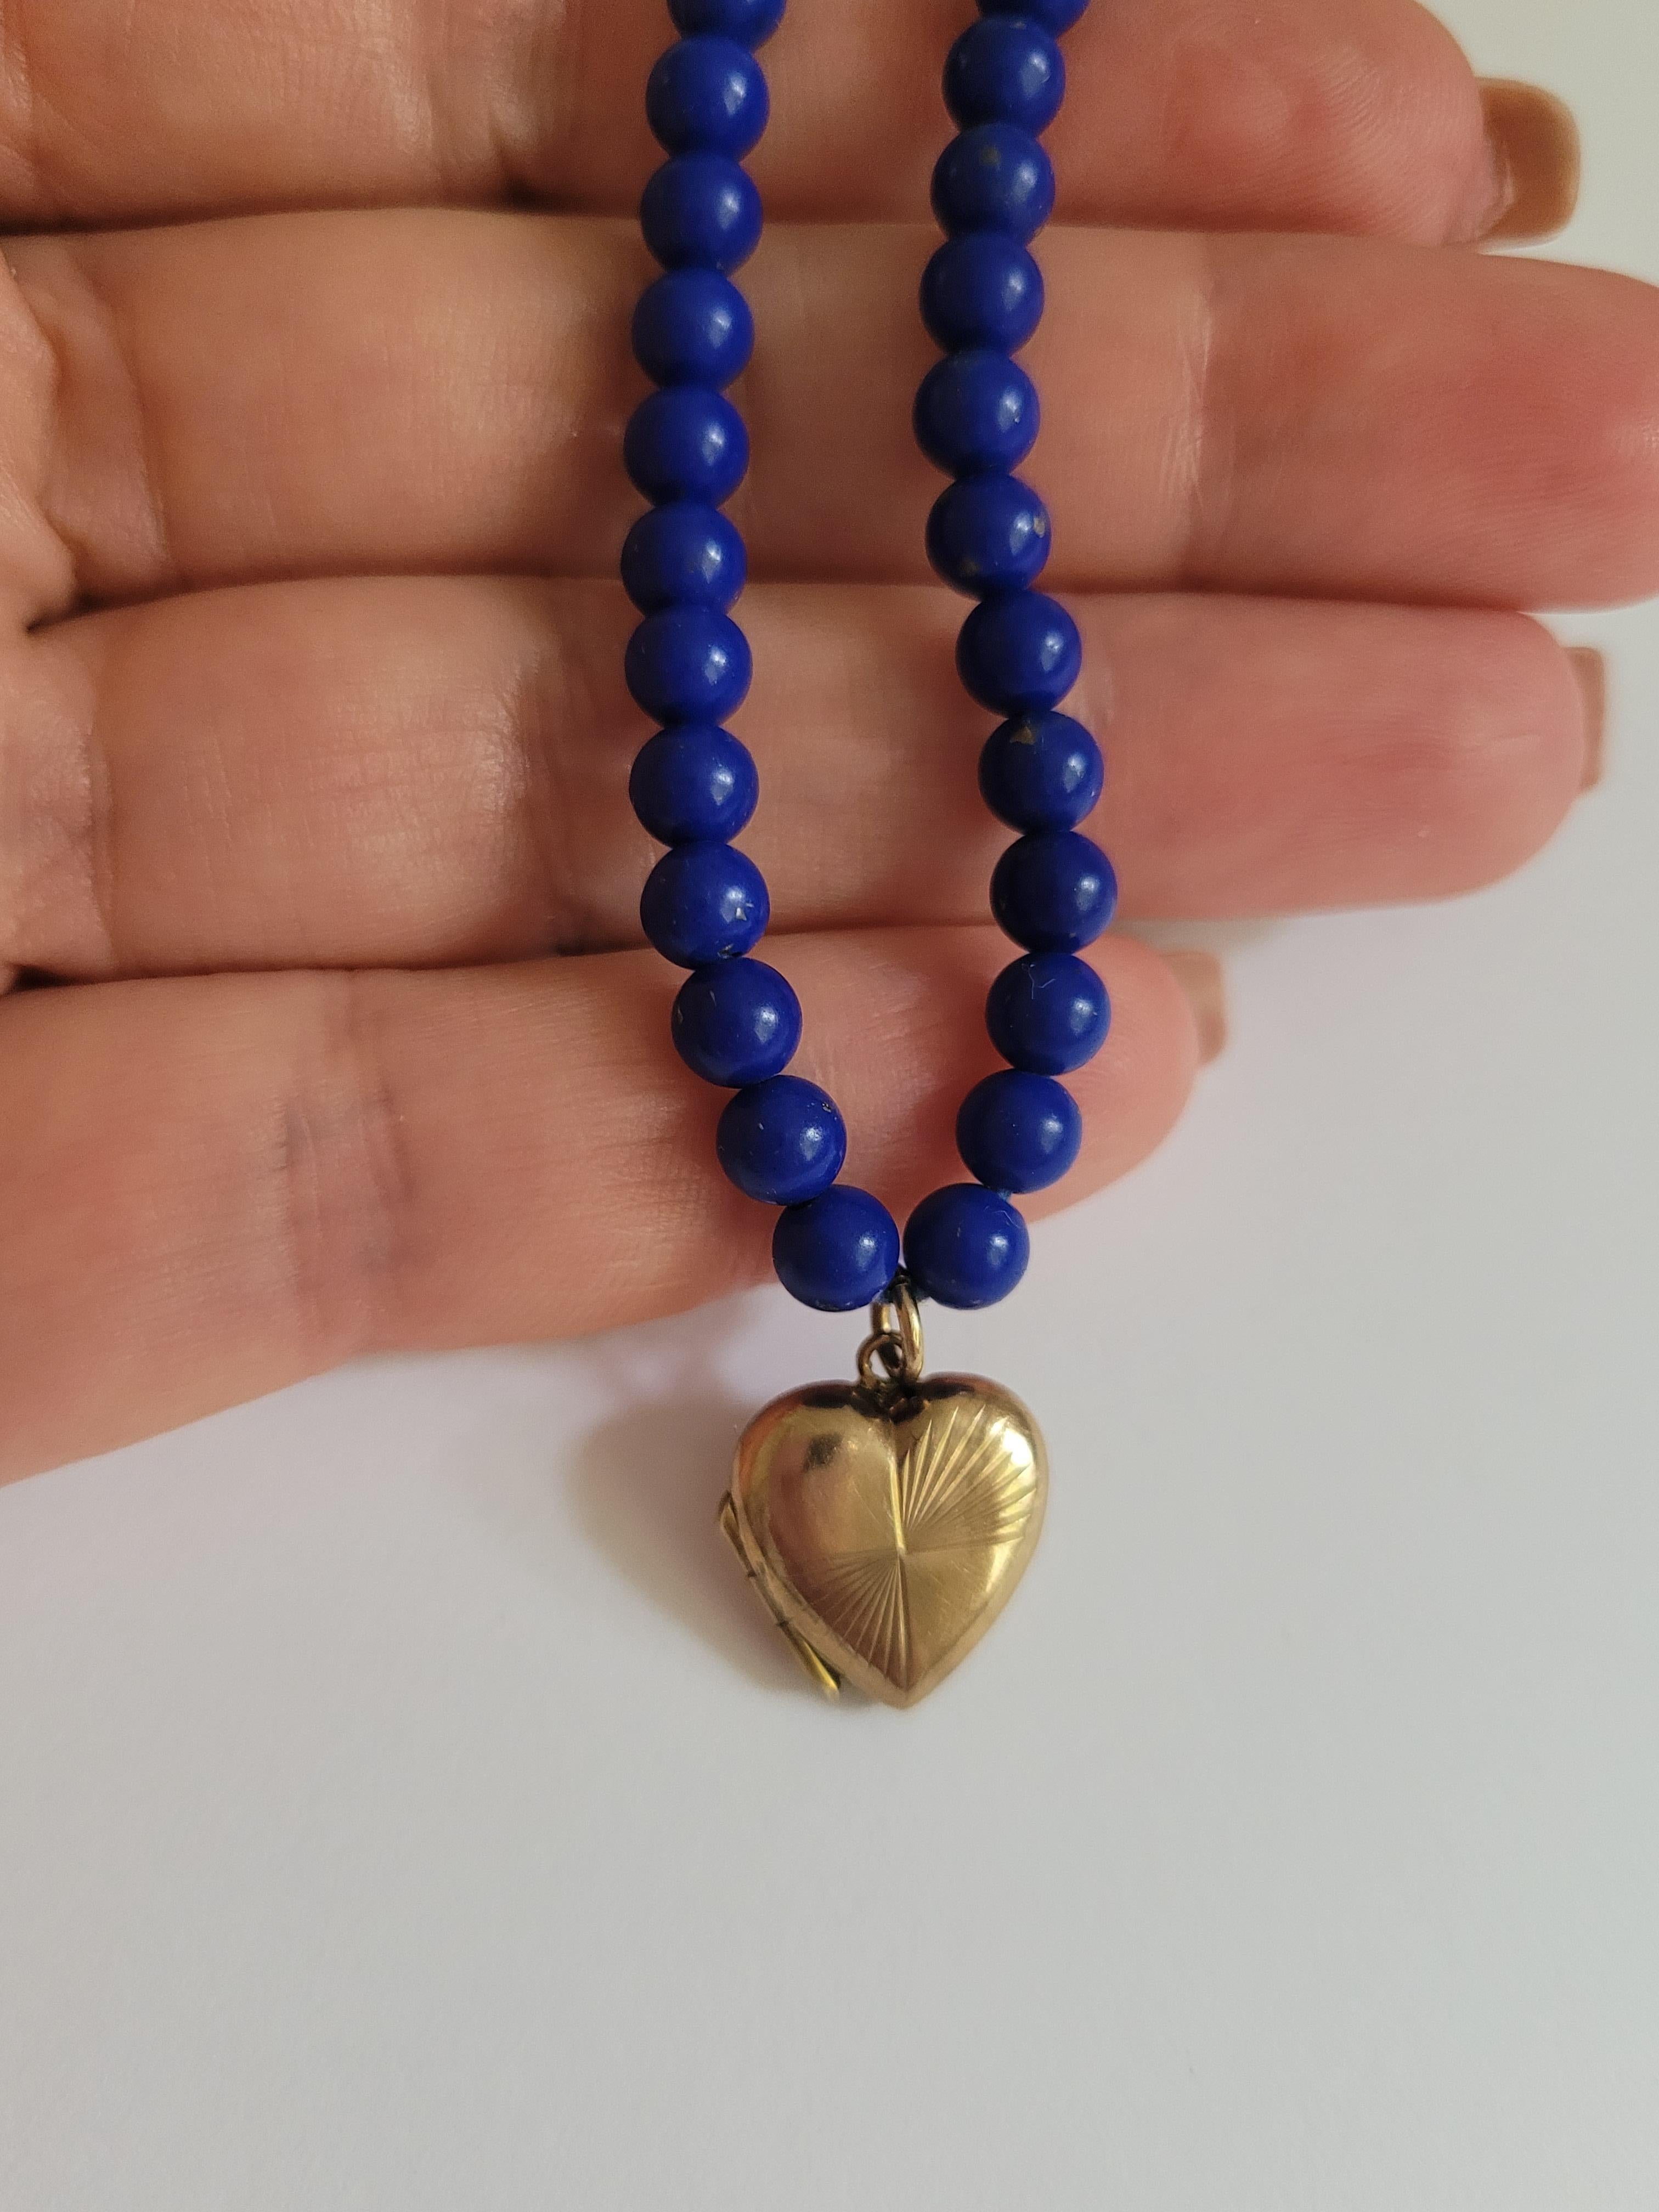 Vintage Heart Locket and Lapis Lazuli Beads necklace For Sale 4